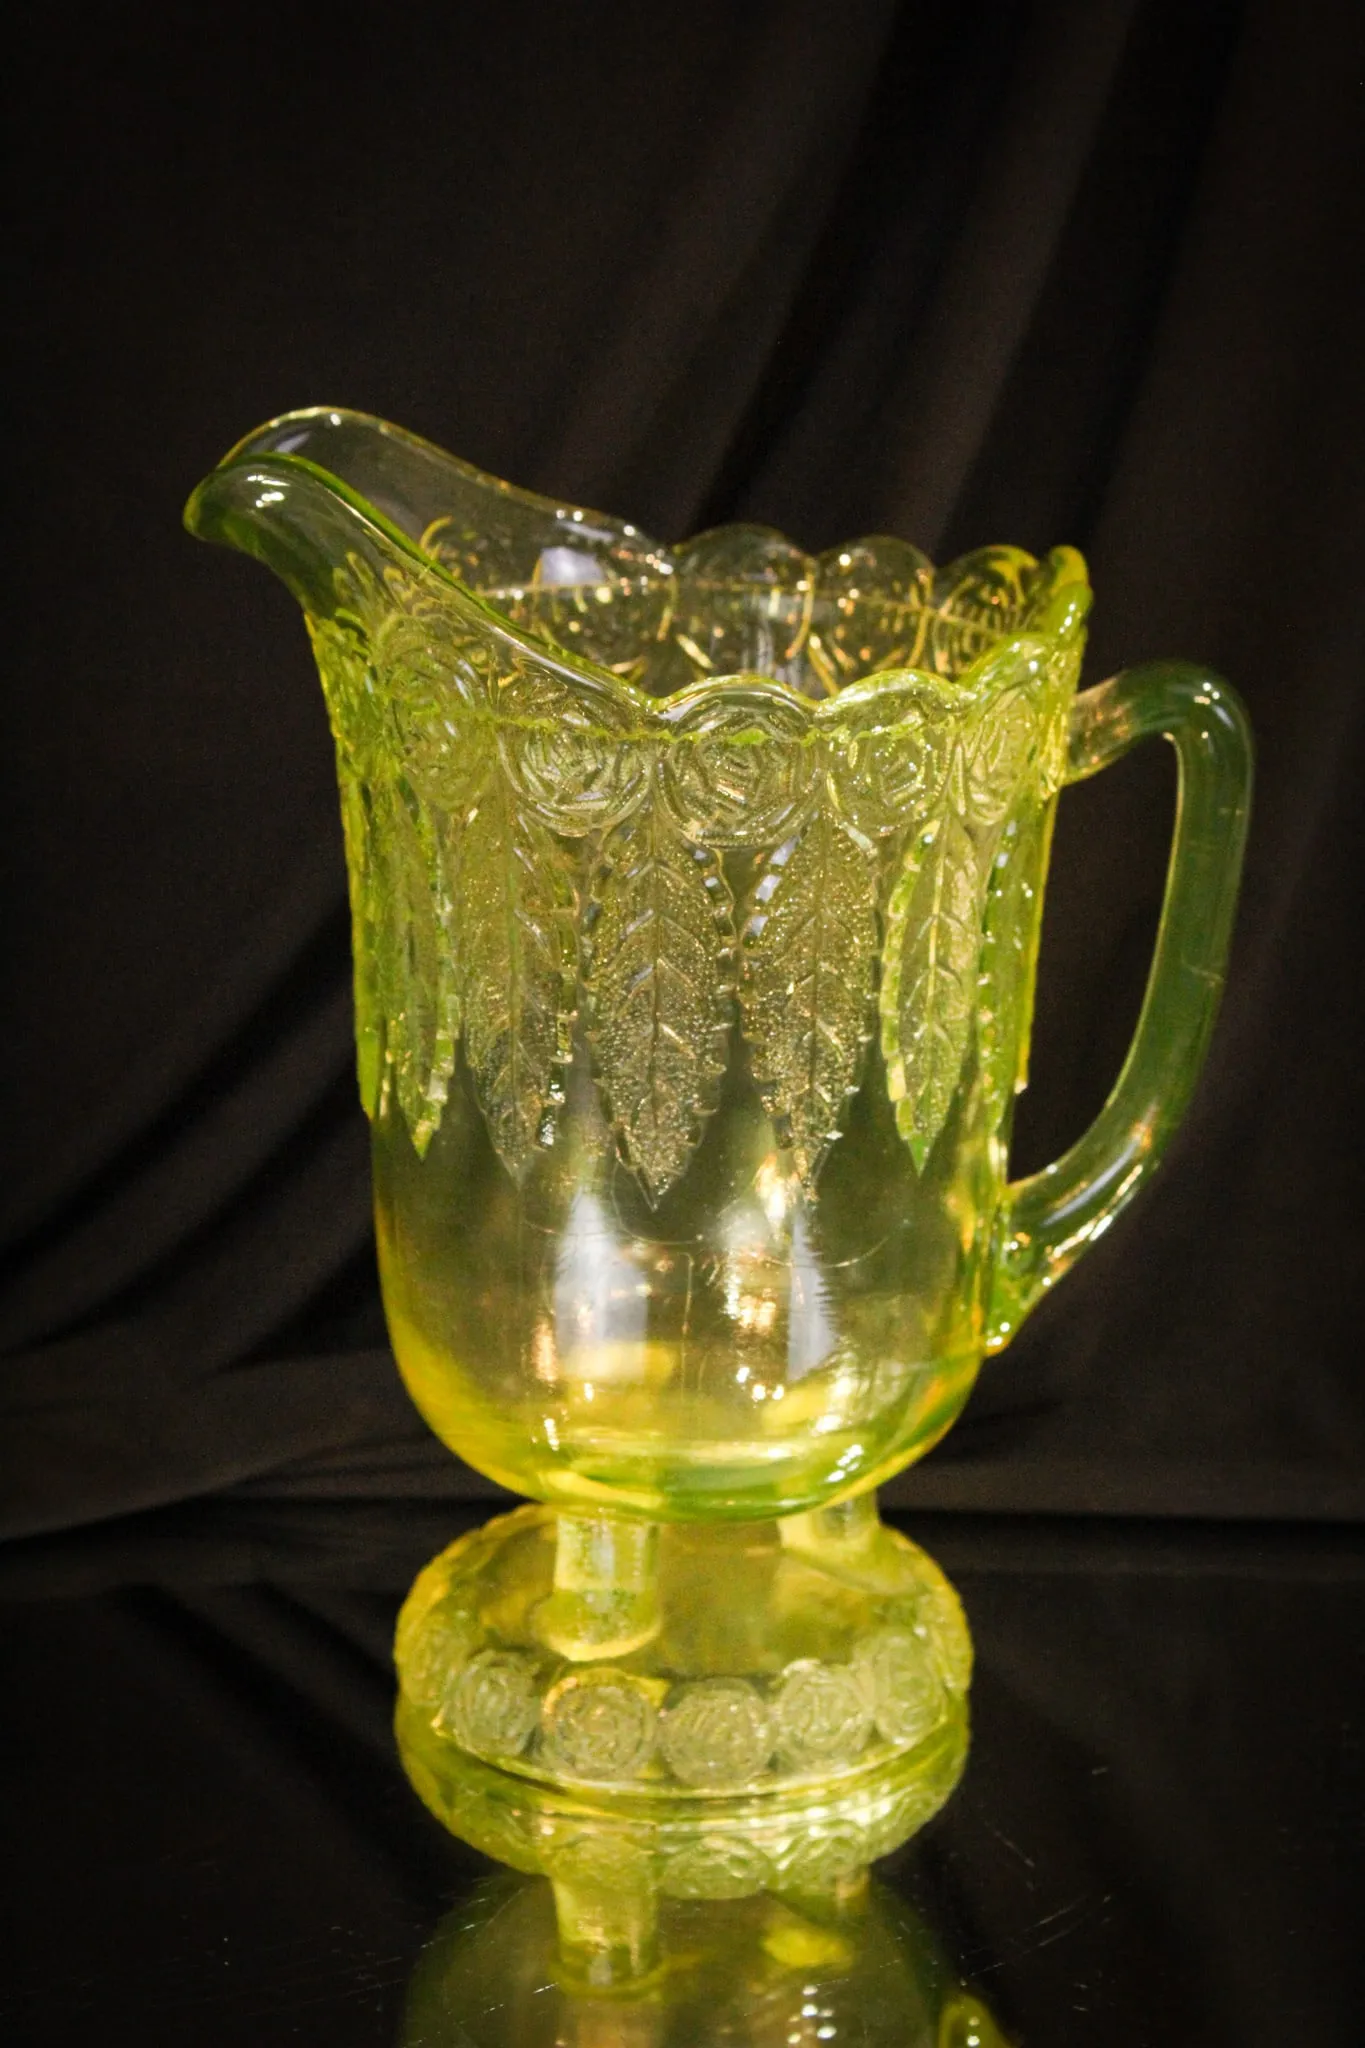 Fantastic art glass at Magnum Auctions promises beauty for all Dec. 9-10